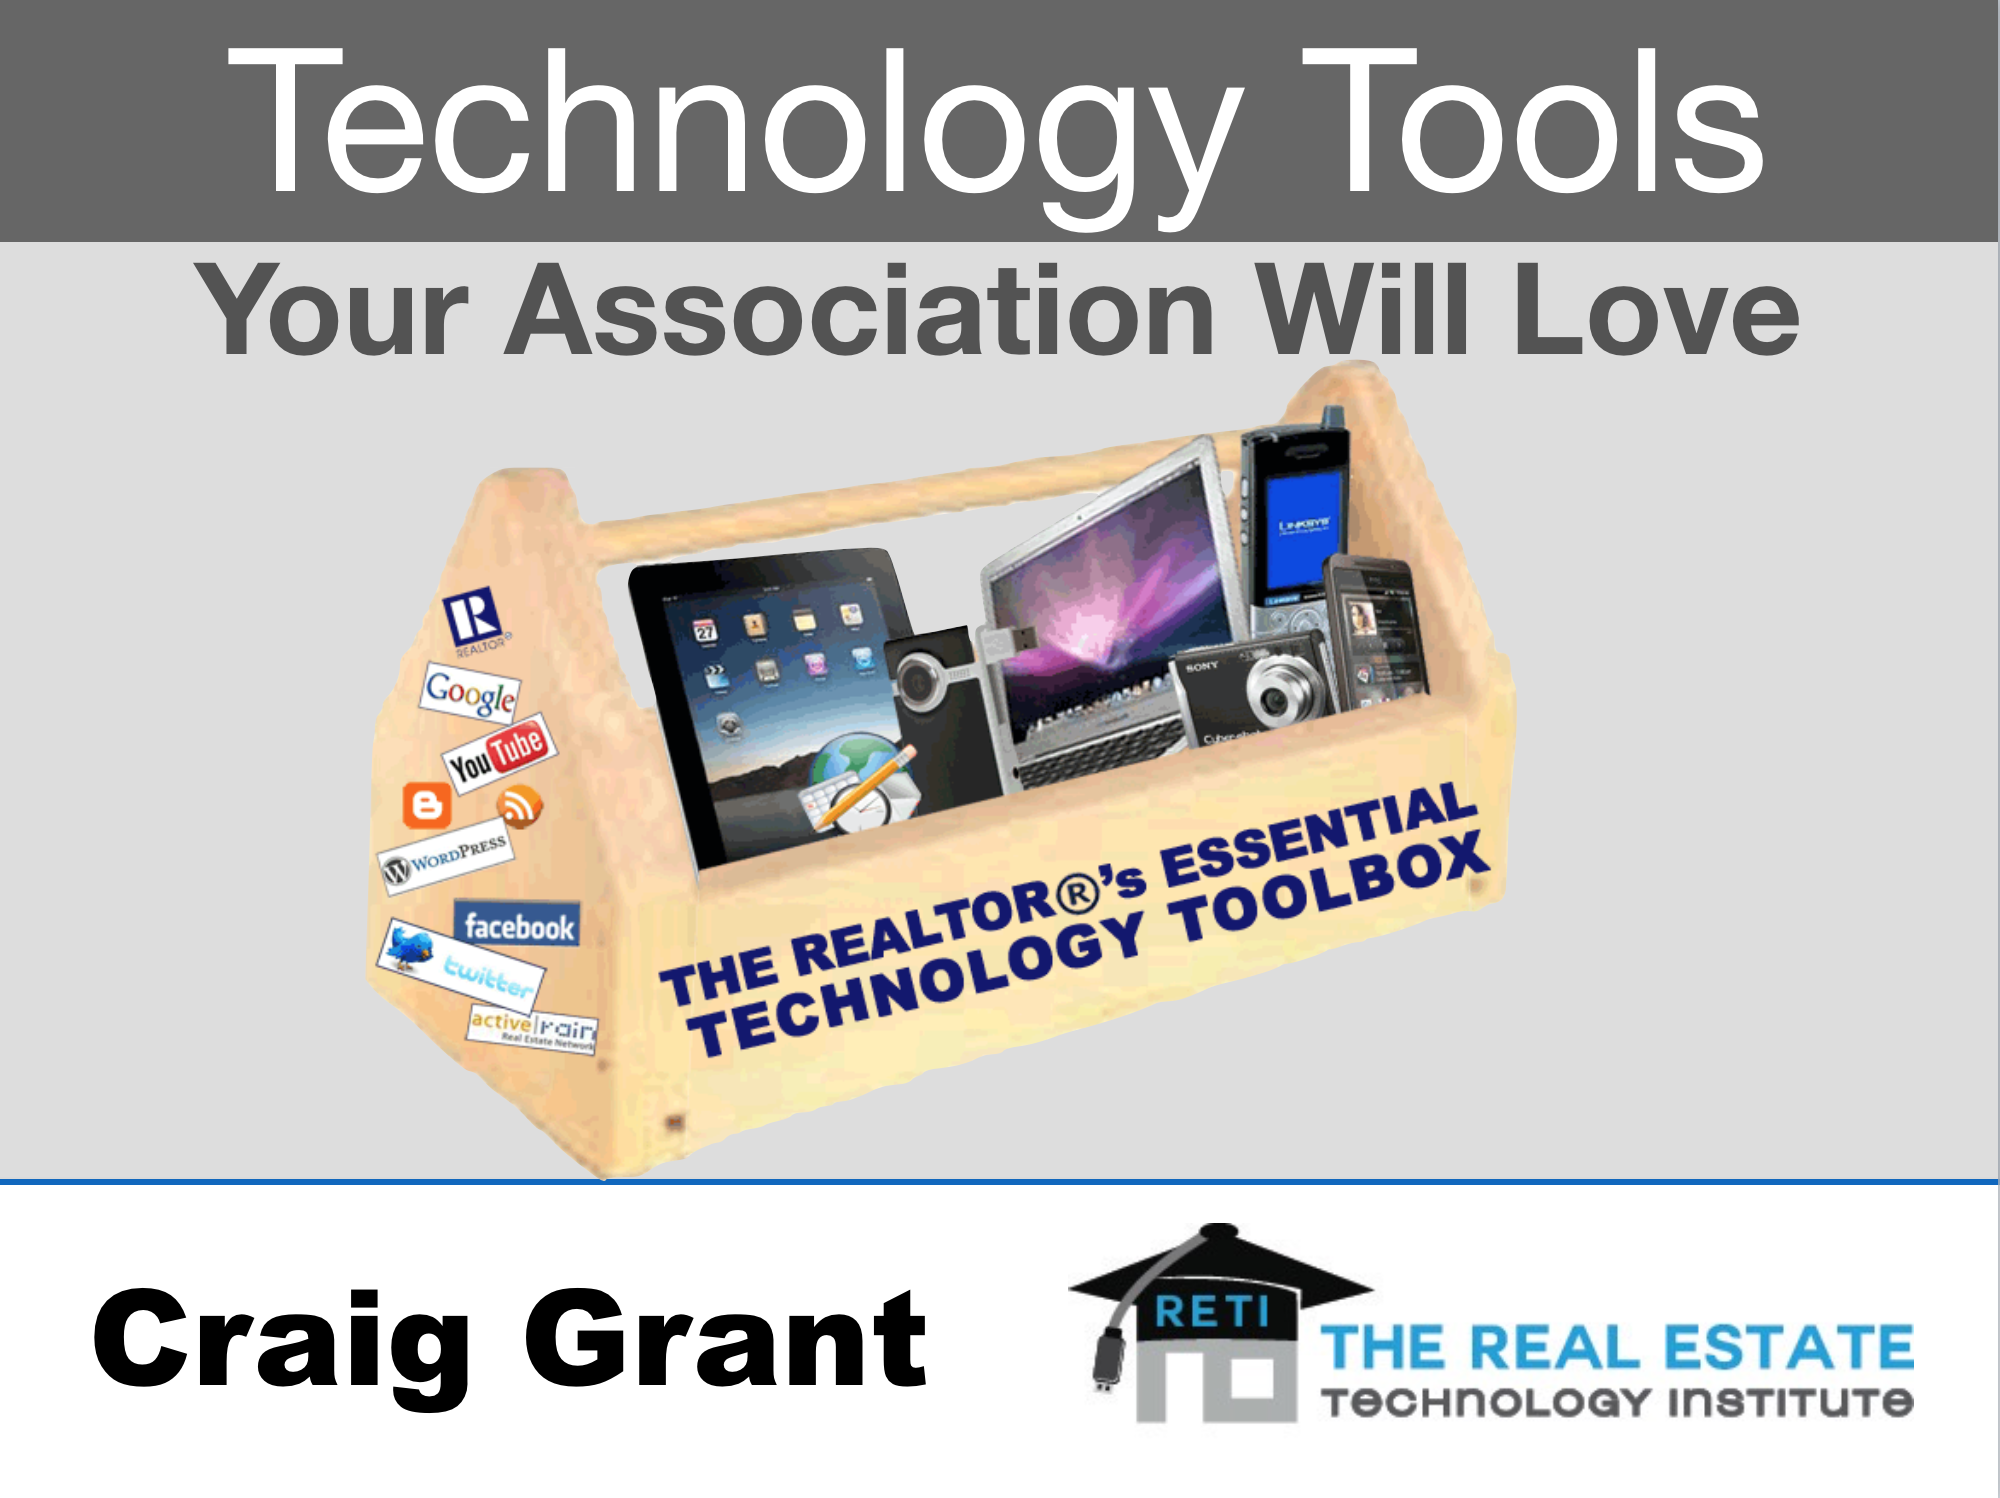 Tech_Tools_Assoc_Love_Cover